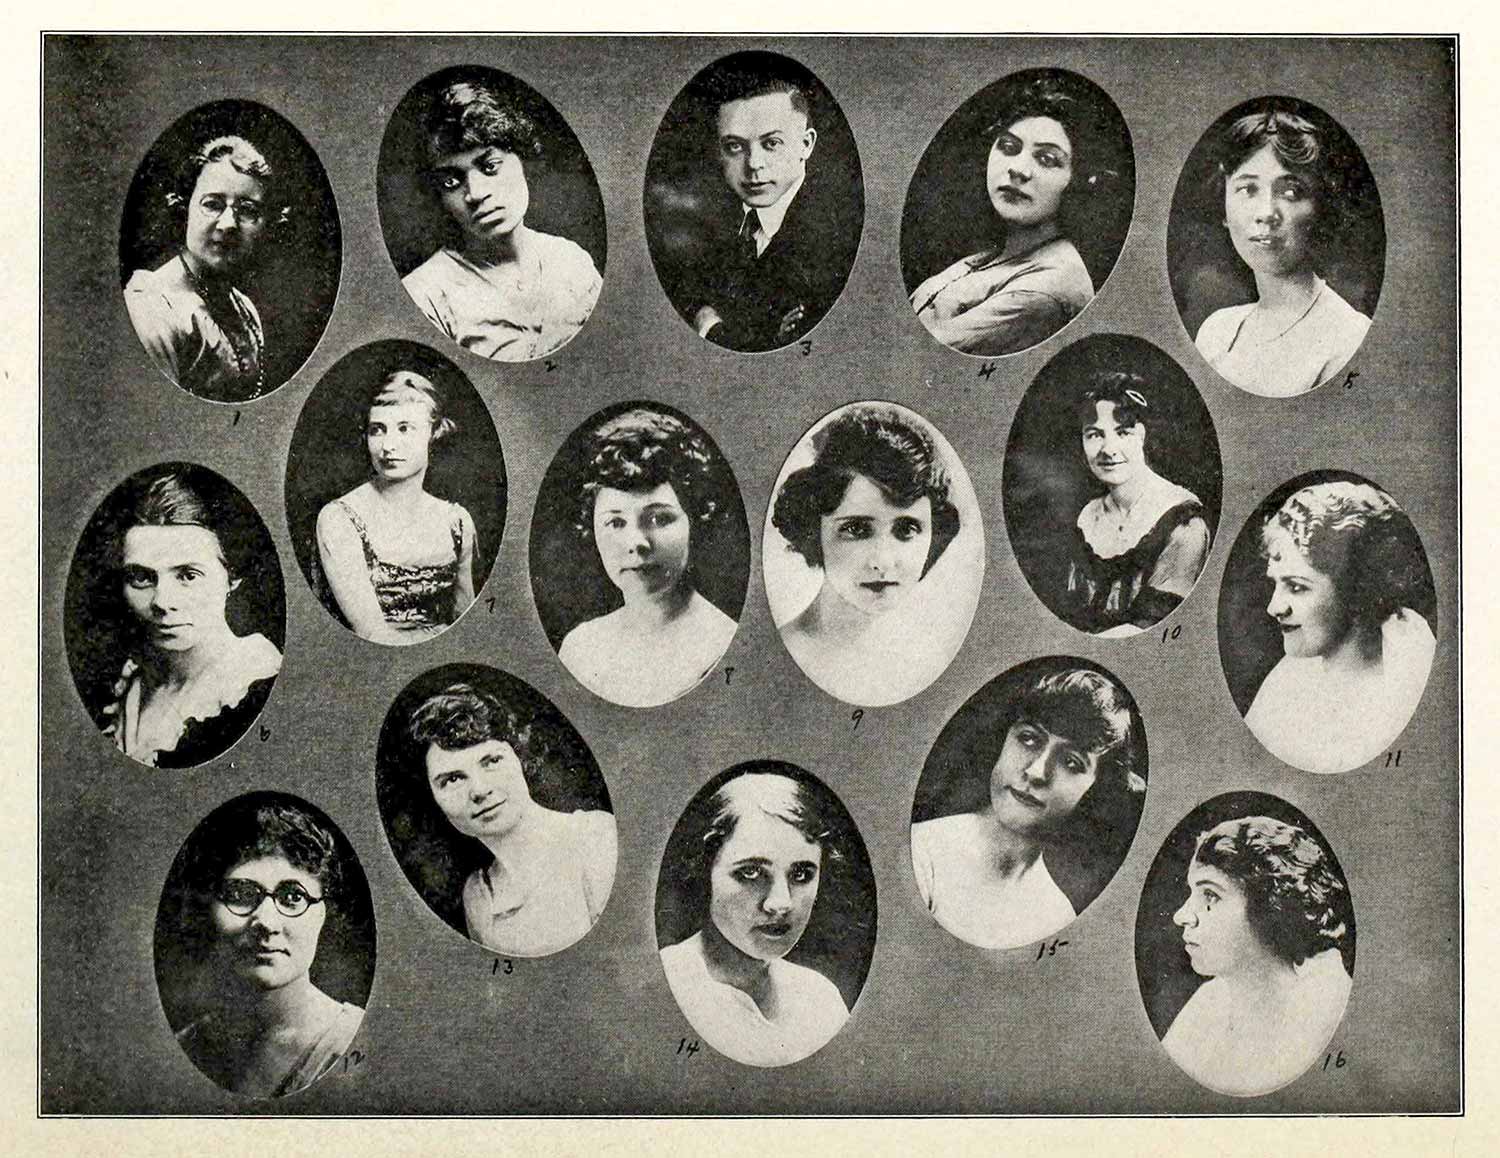 Class of 1920, New England Conservatory of Music, Neume Yearbook, Bernice Annette Bonner (#2.)